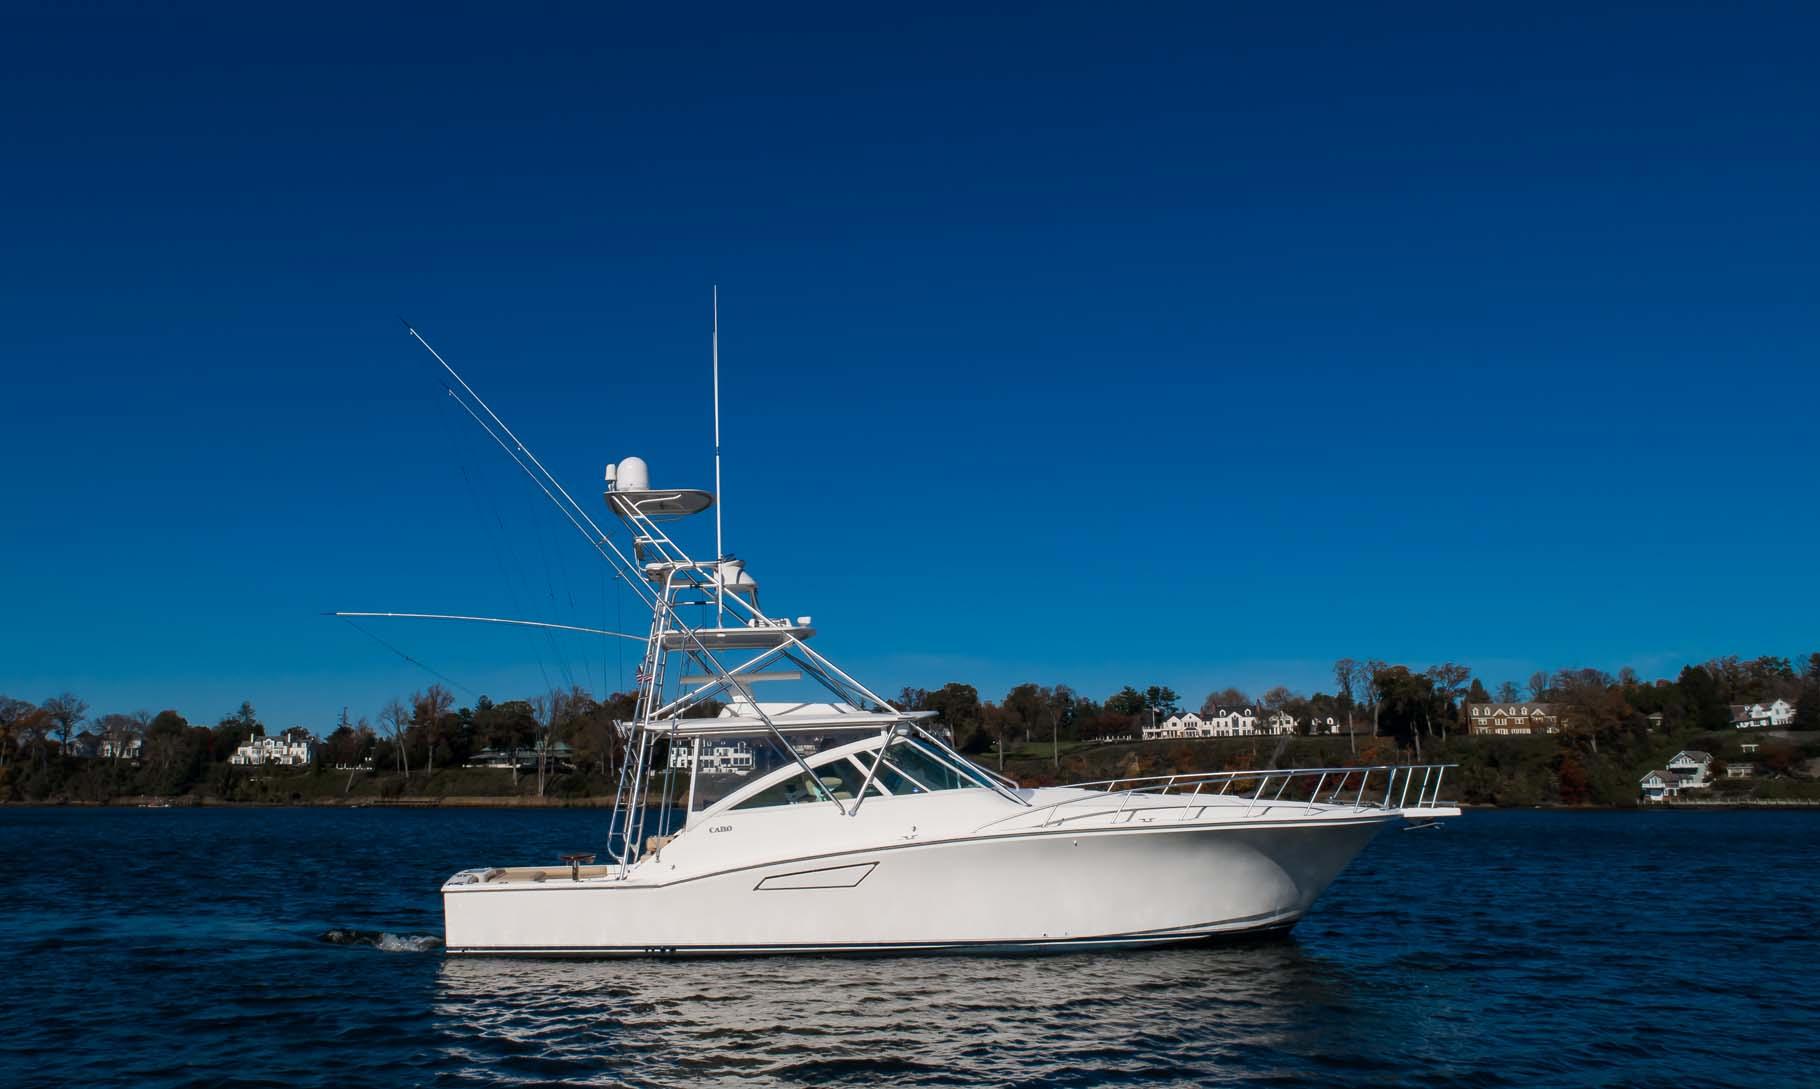 2005 Cabo 45 Express CAT powered